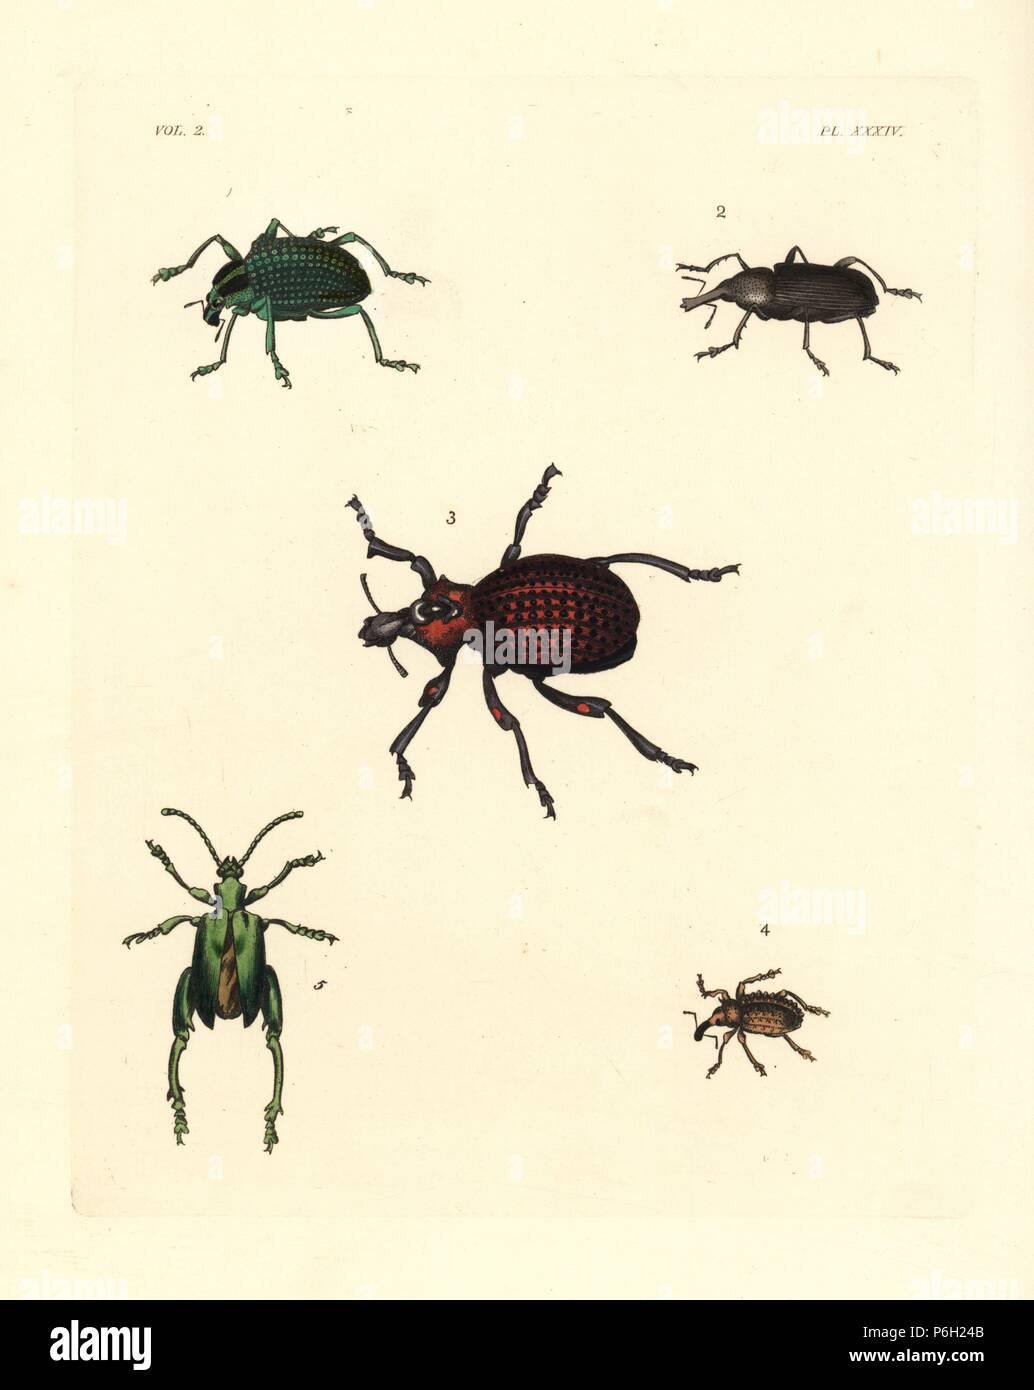 Brazilian diamond beetle, Entimus imperialis 1, bearded weevil, female, Rhinostomus barbirostris 2, red-spotted lily weevil, Brachycerus ornatus 3, strawberry root weevil, Sciaphilus asperatus 4, and frog-legged beetle, Sagra femorata 5. Handcoloured lithograph from John O. Westwood's new edition of Dru Drury's 'Illustrations of Exotic Entomology,' Bohn, London, 1837. Stock Photo